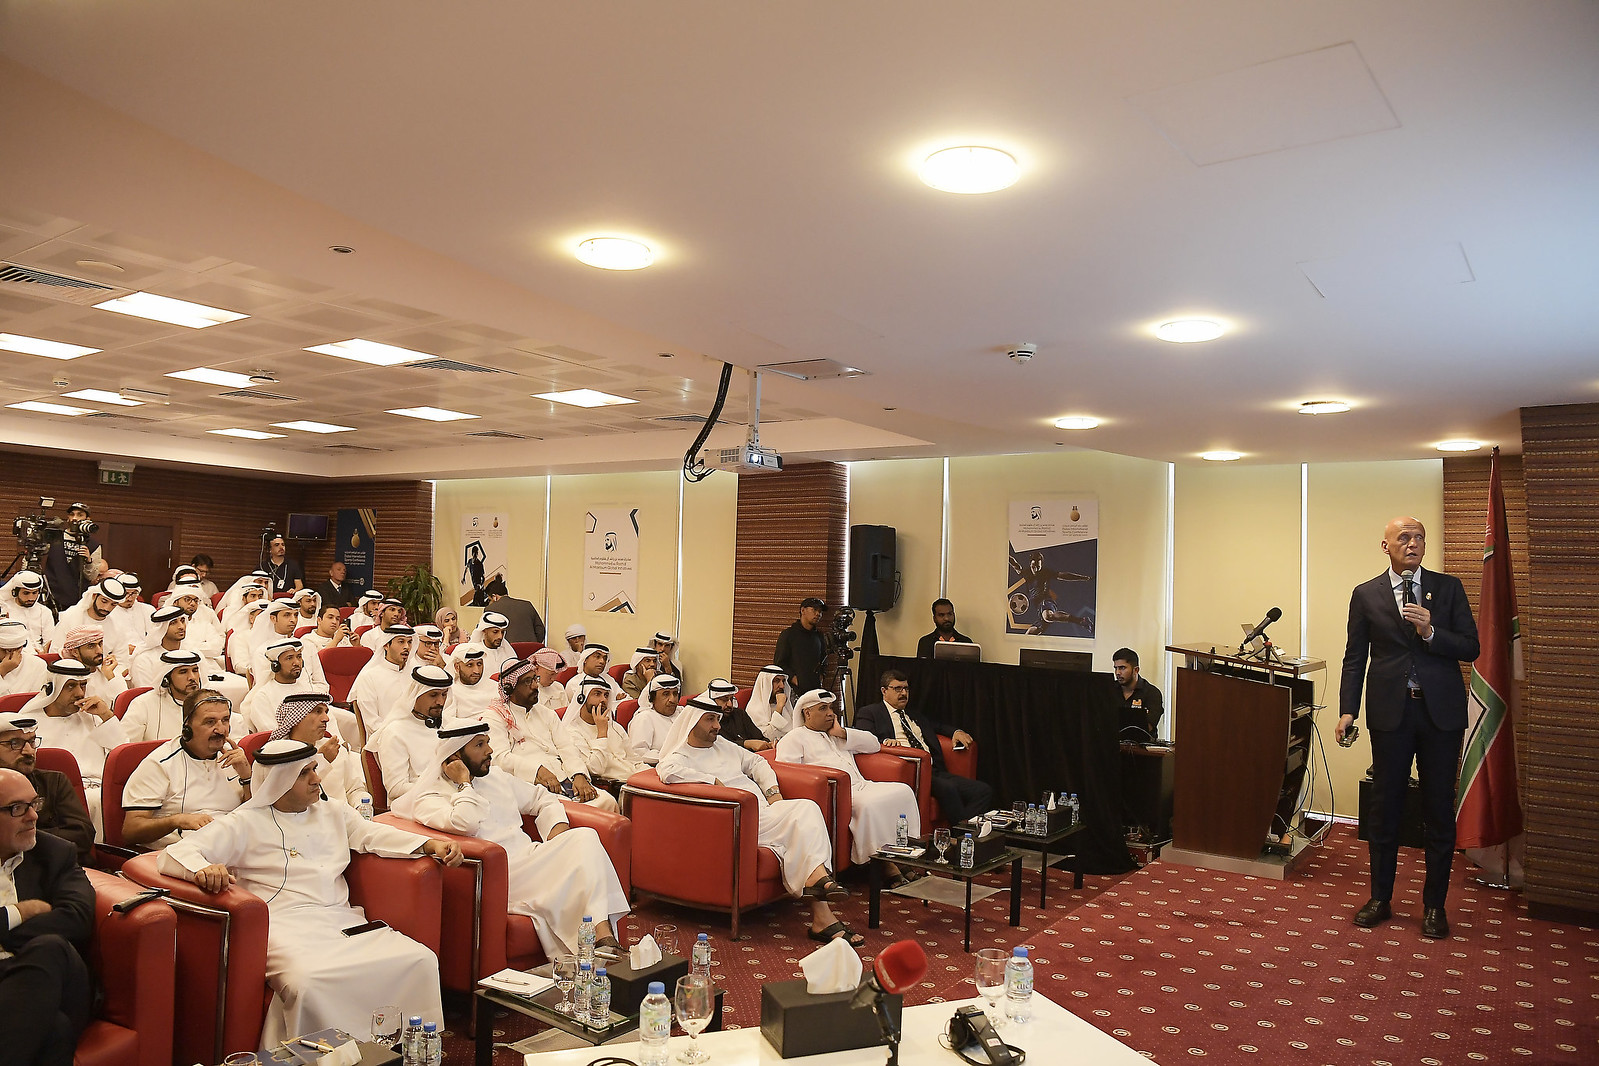 13th edition of the Dubai International Sports Conference